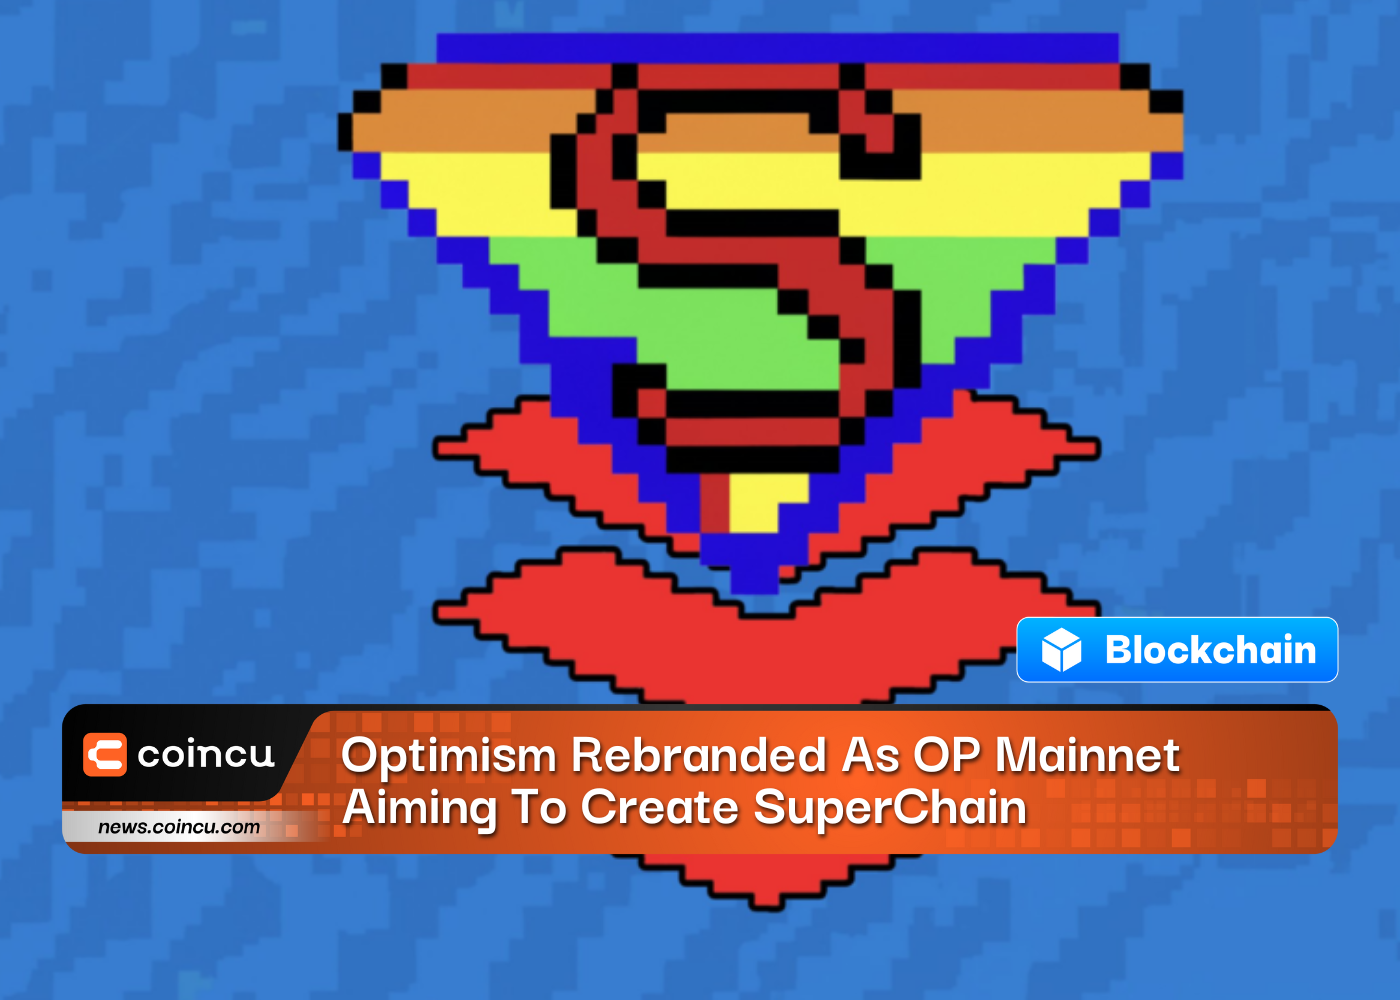 Optimism Rebranded As OP Mainnet, Aiming To Create SuperChain